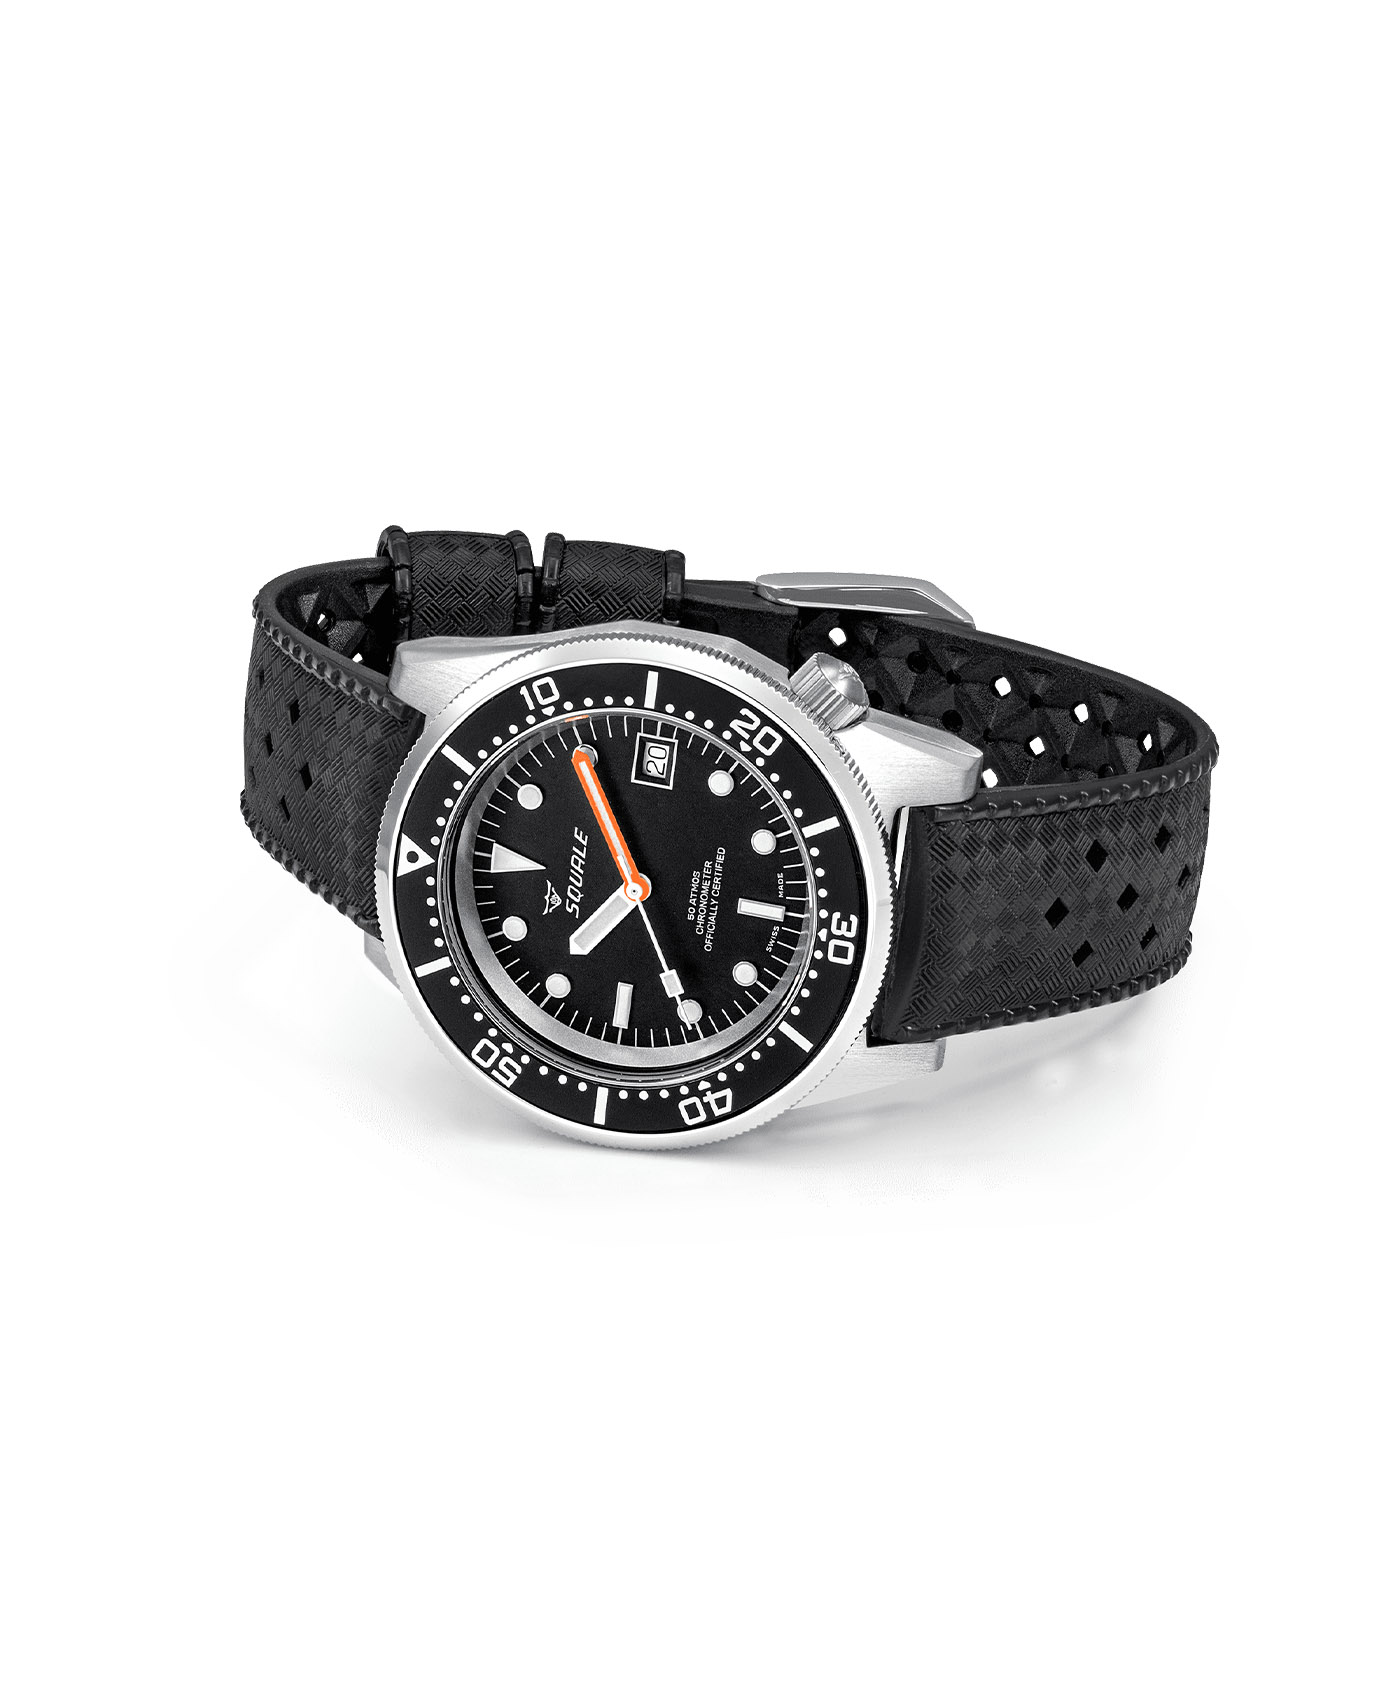 Squale - 1521 Classic COSC - 1521COSCL-side